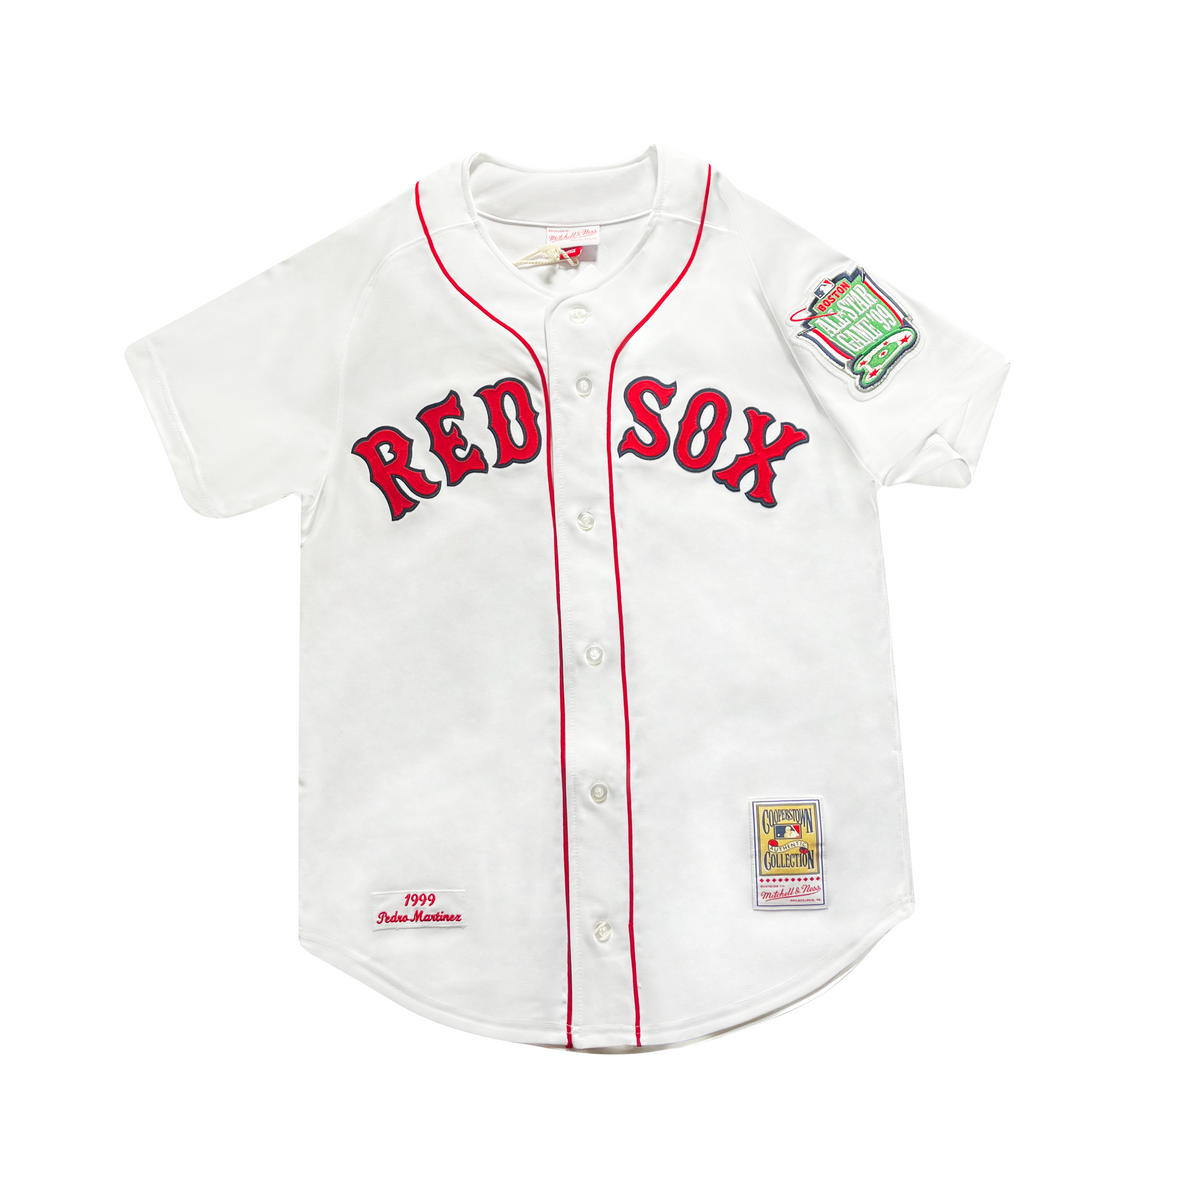 Pedro Martinez Autographed White Red Sox Jersey - Beautifully Matted and  Framed - Hand Signed By Martinez and Certified Authentic by JSA - Includes